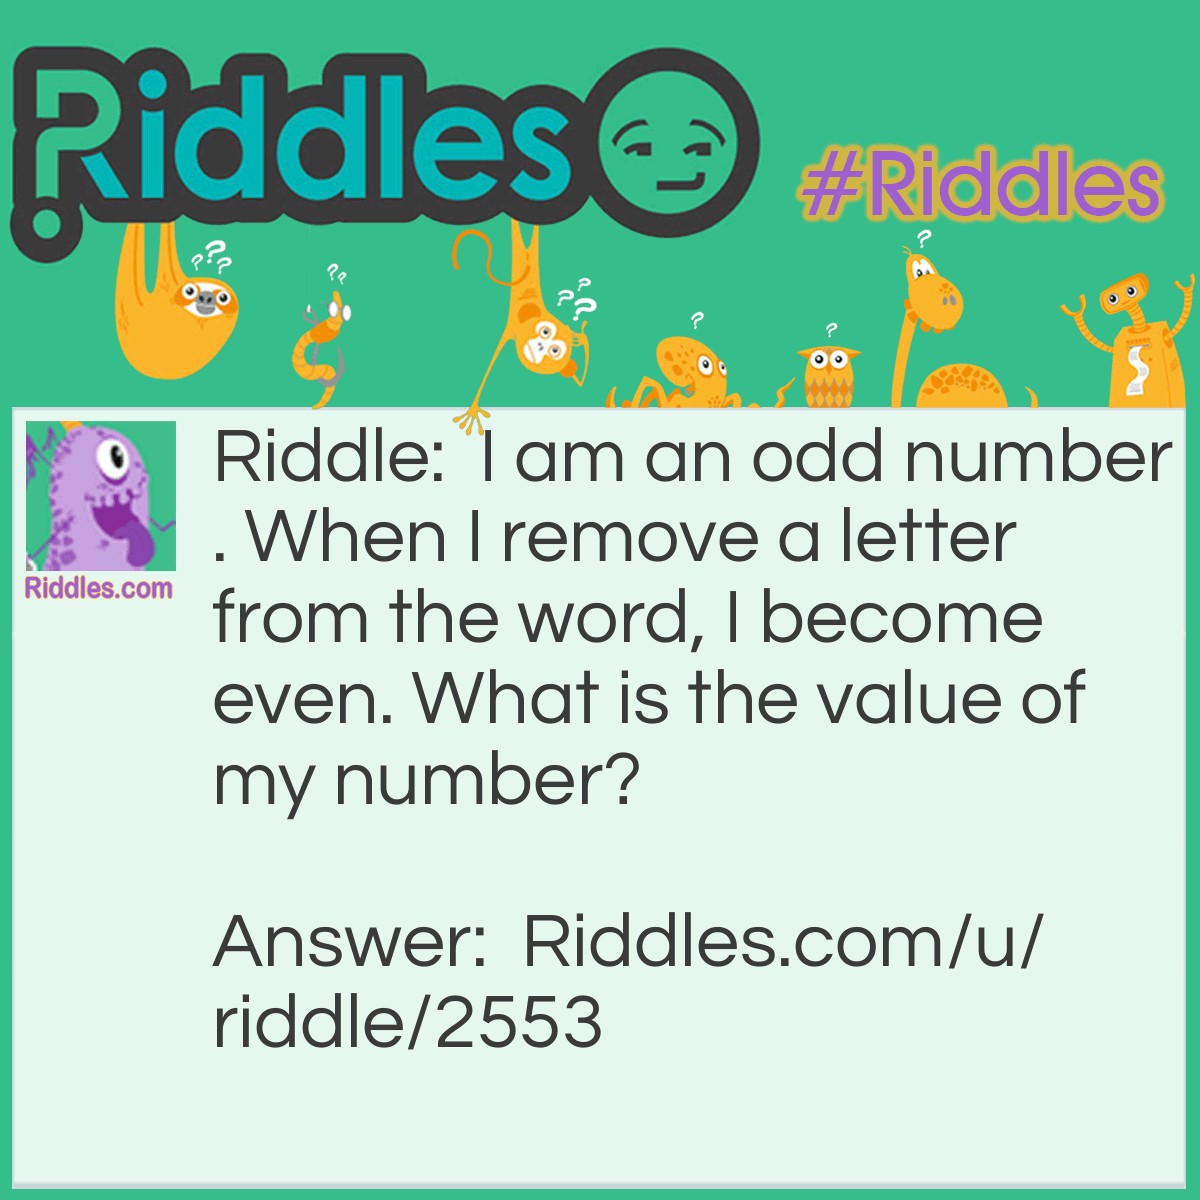 Riddle: I am an odd number. When I remove a letter from the word, I become even. What is the value of my number? Answer: Seven. When I remove the s, I become even.